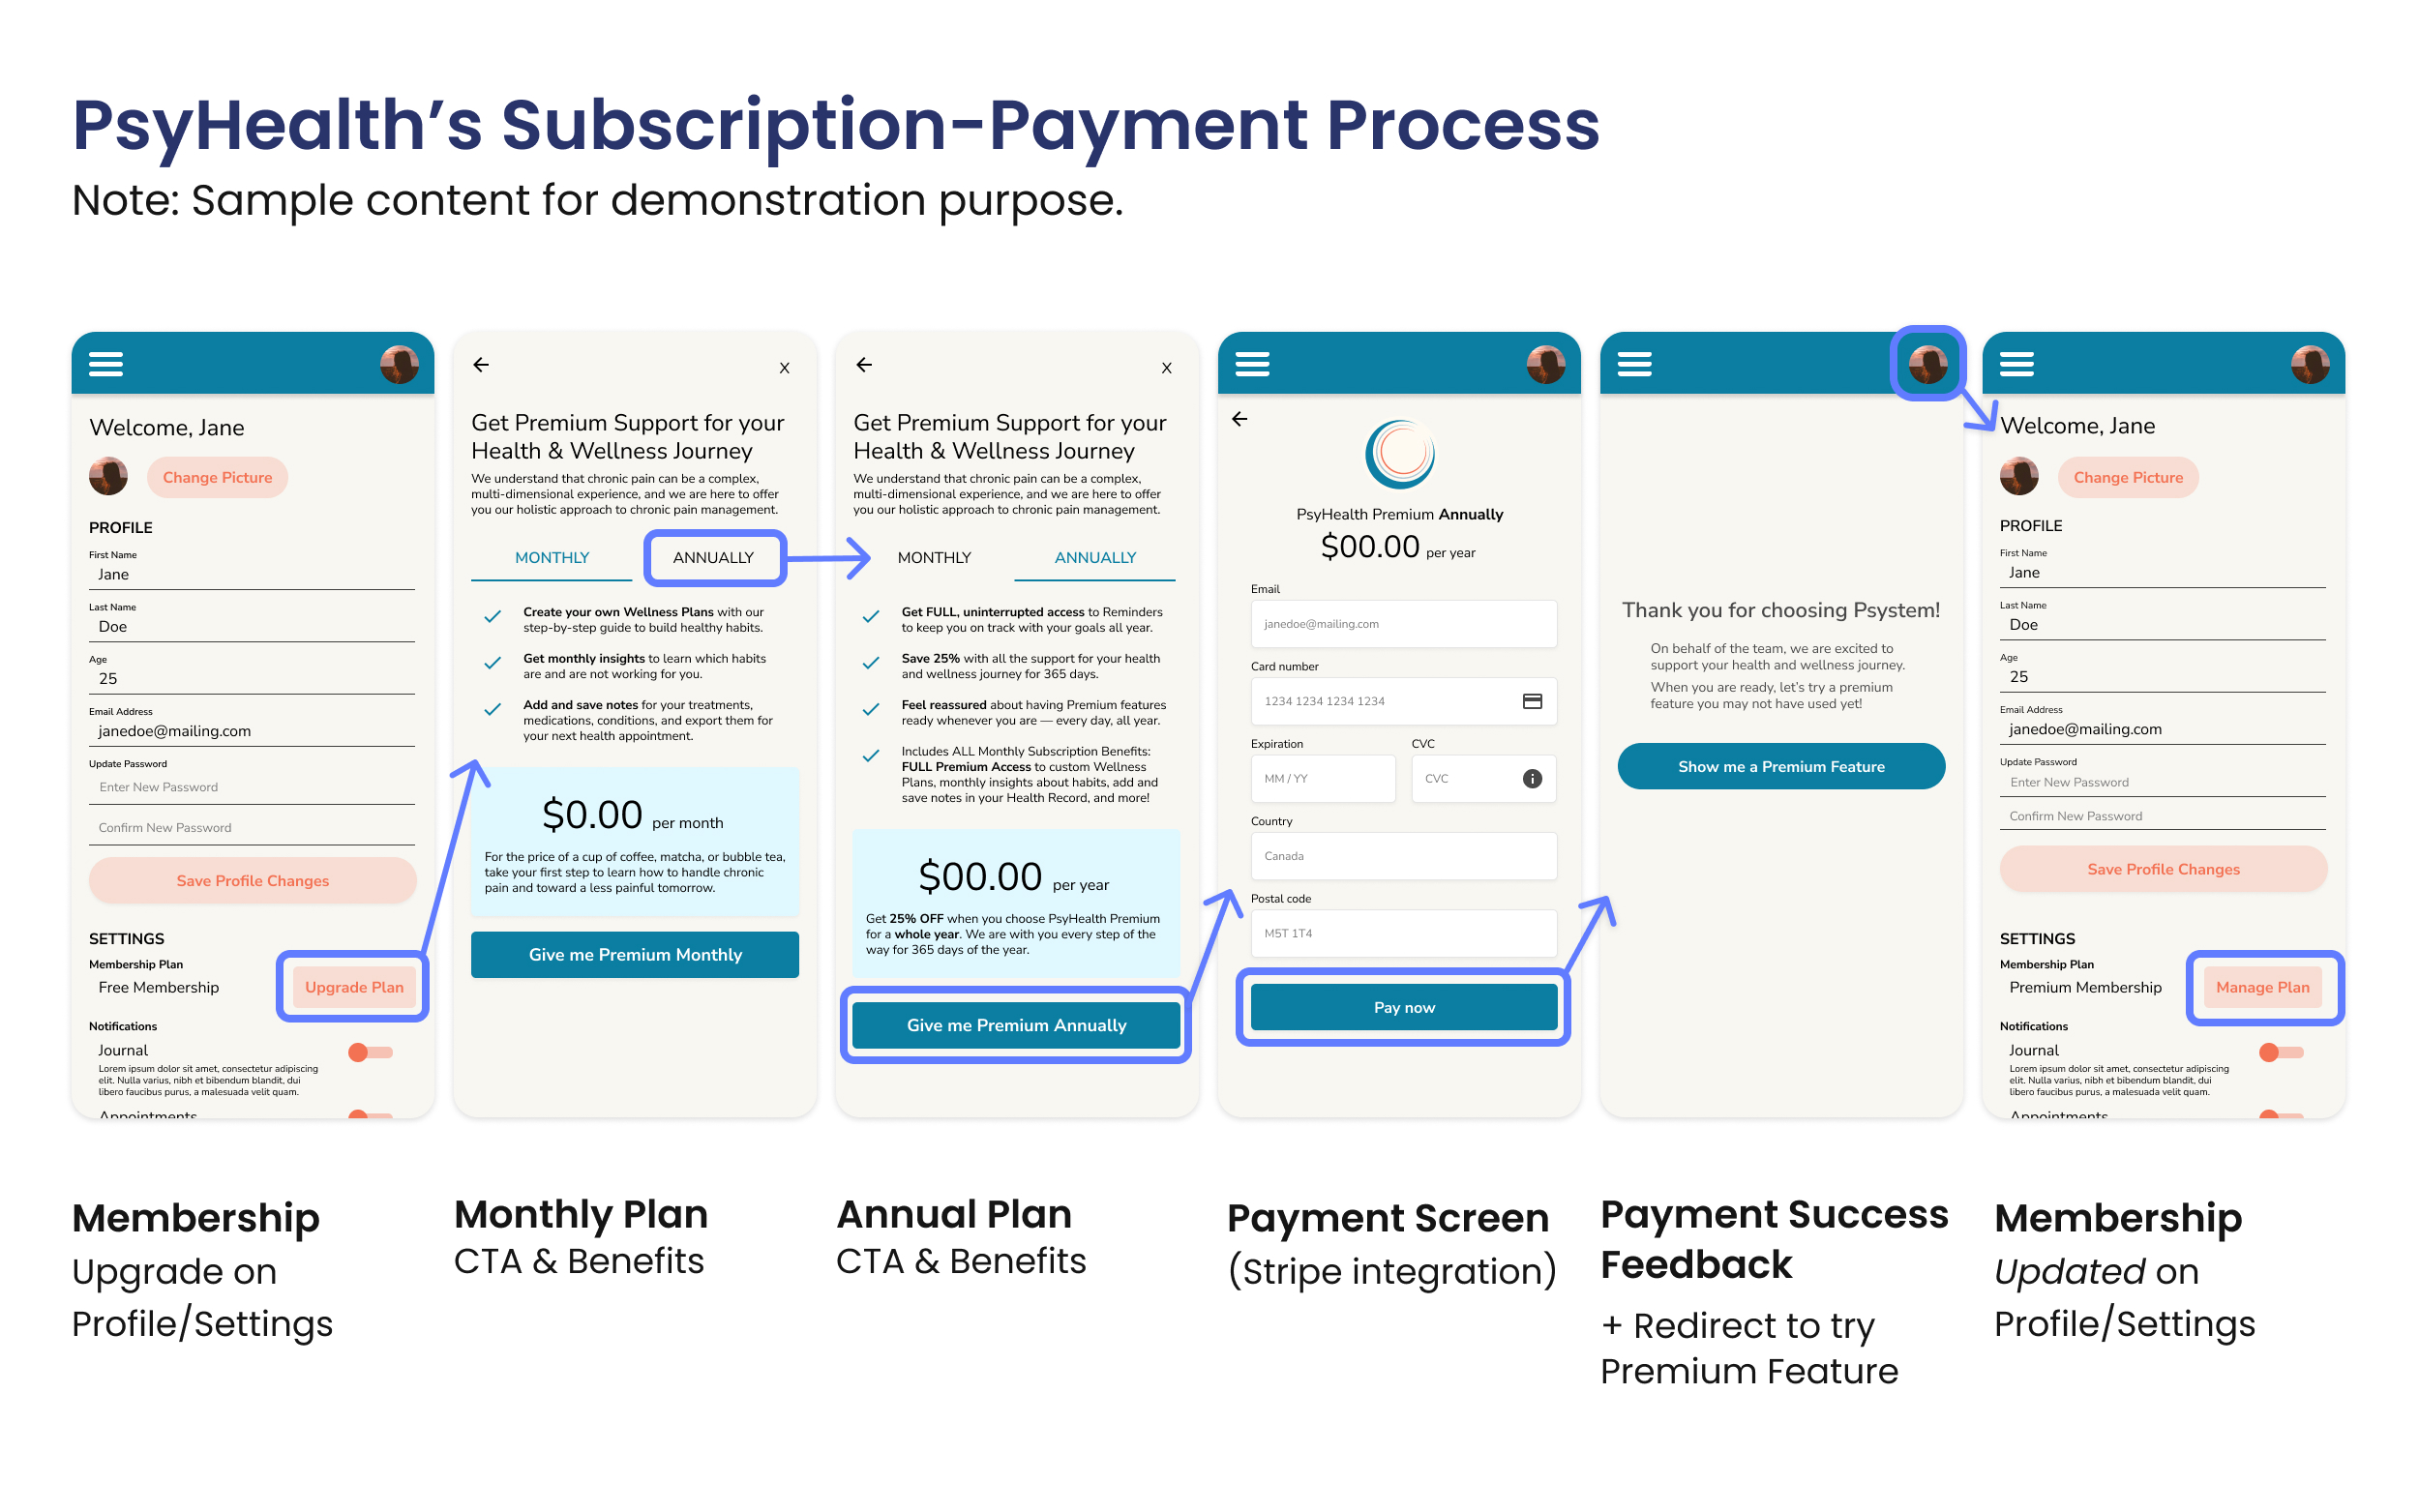 PsyHealth's Subscription-Payment process, starting on the Profile/Settings screen